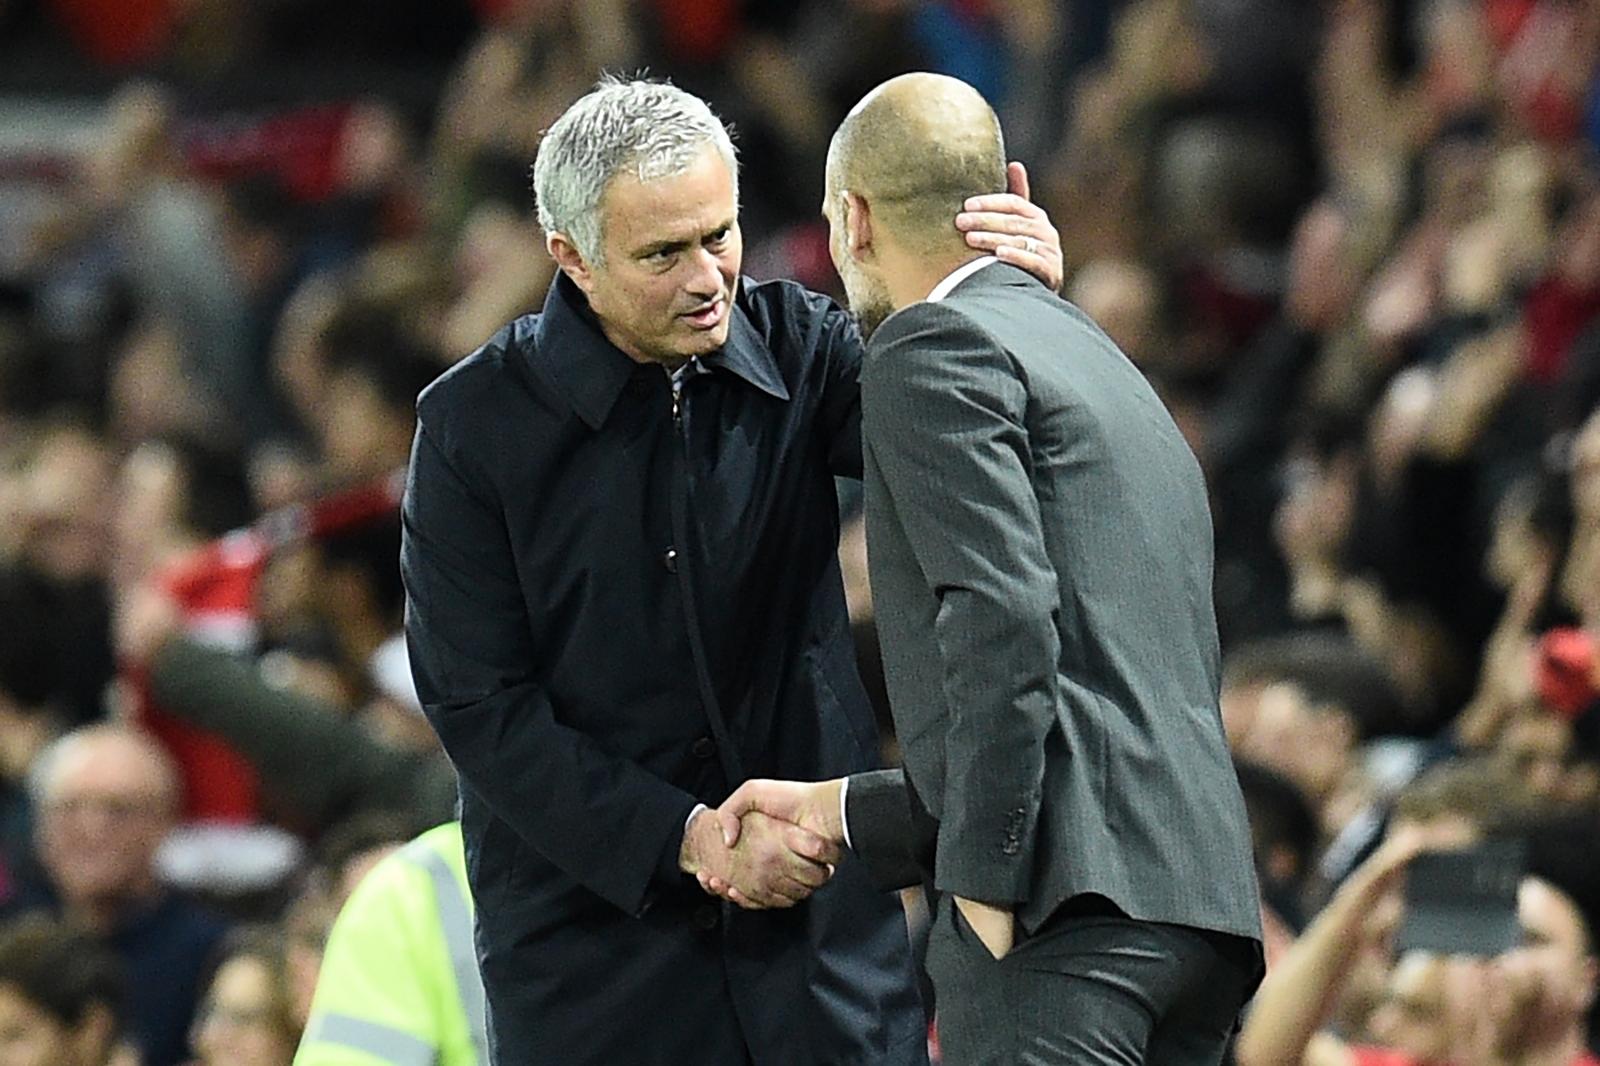 Manchester United manager Jose Mourinho better than Pep Guardiola, says